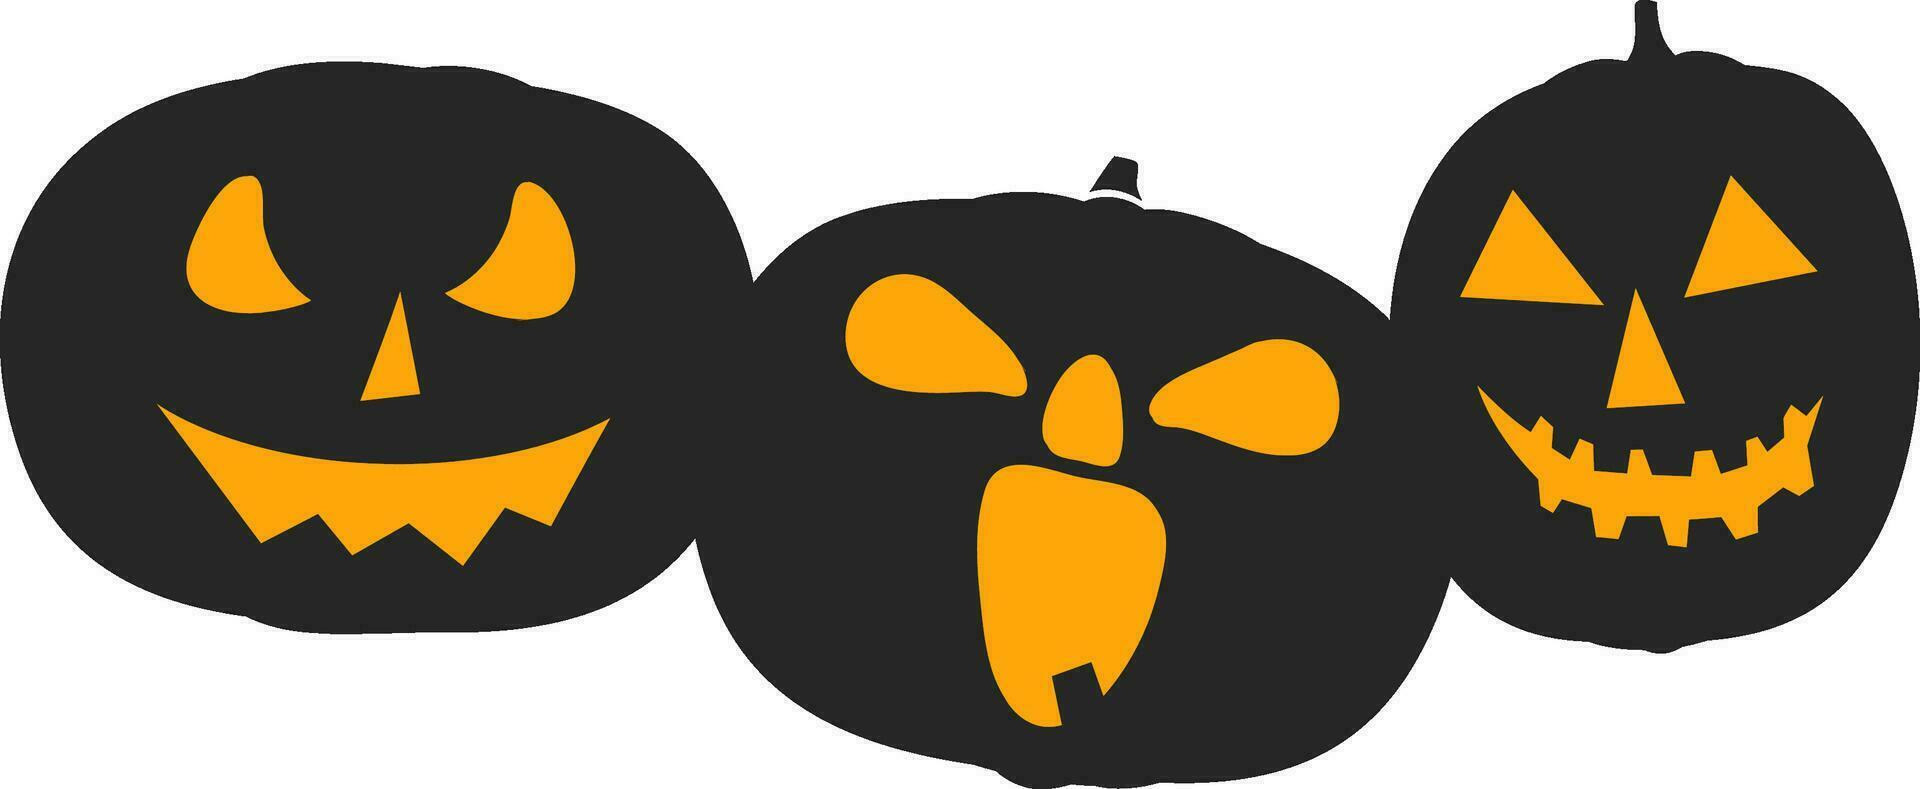 Halloween evil faces of pumpkin in black and yellow color. vector